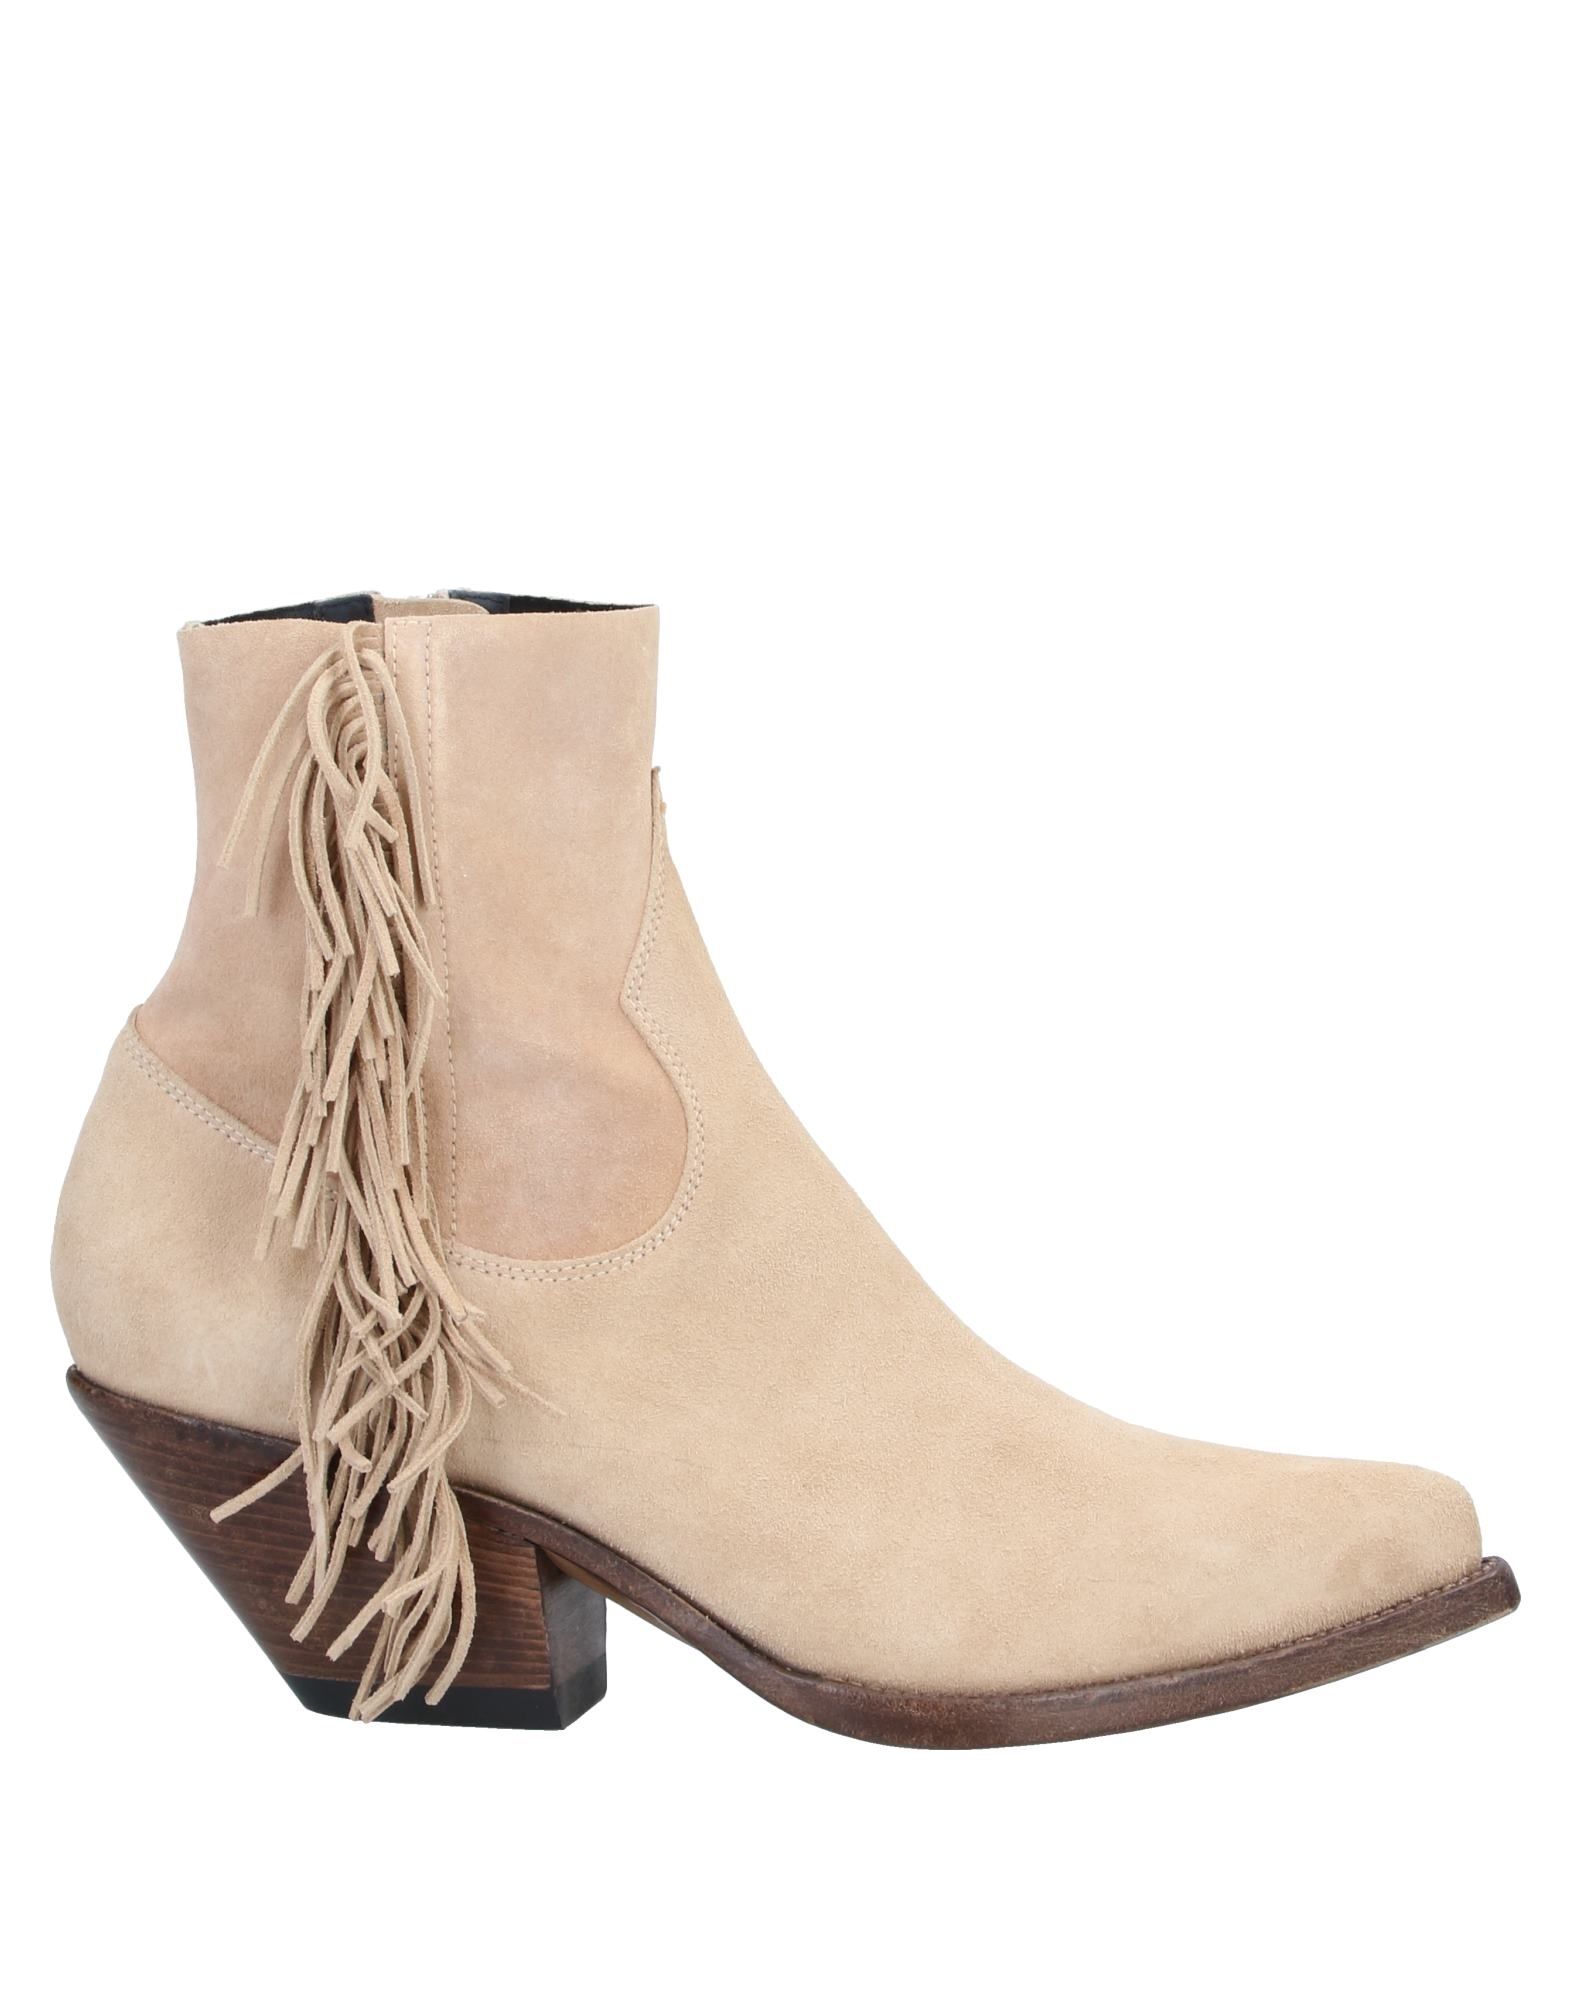 BUTTERO® Ankle boots - Item 11885964